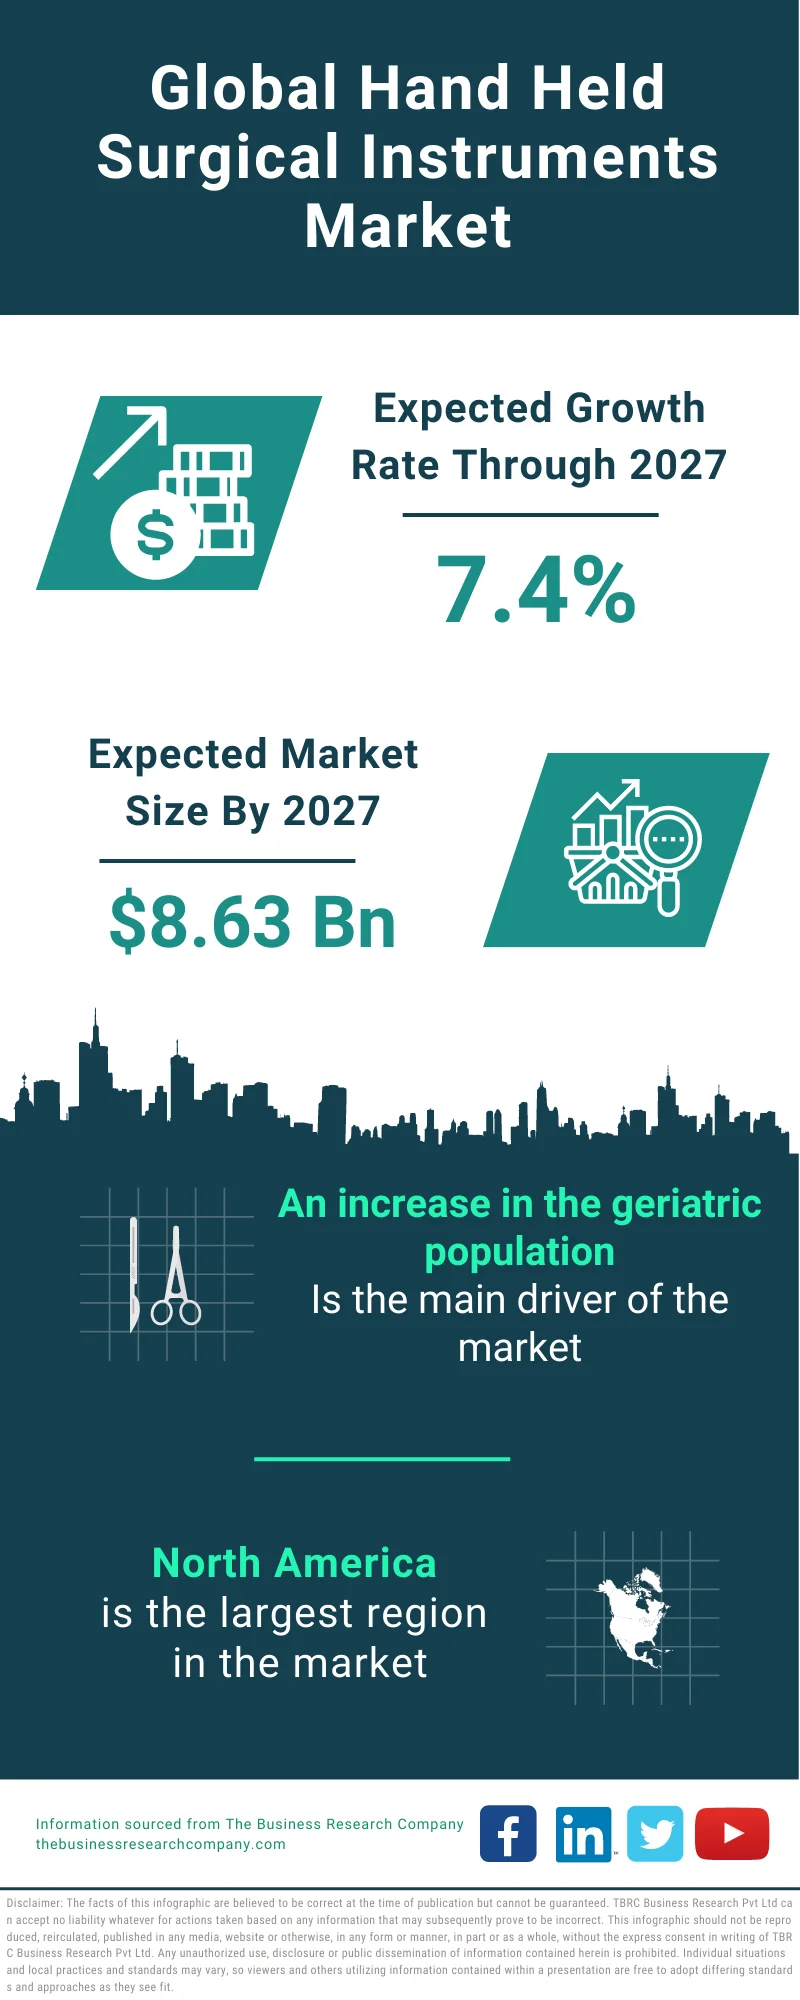 Hand-Held Surgical Instruments Market